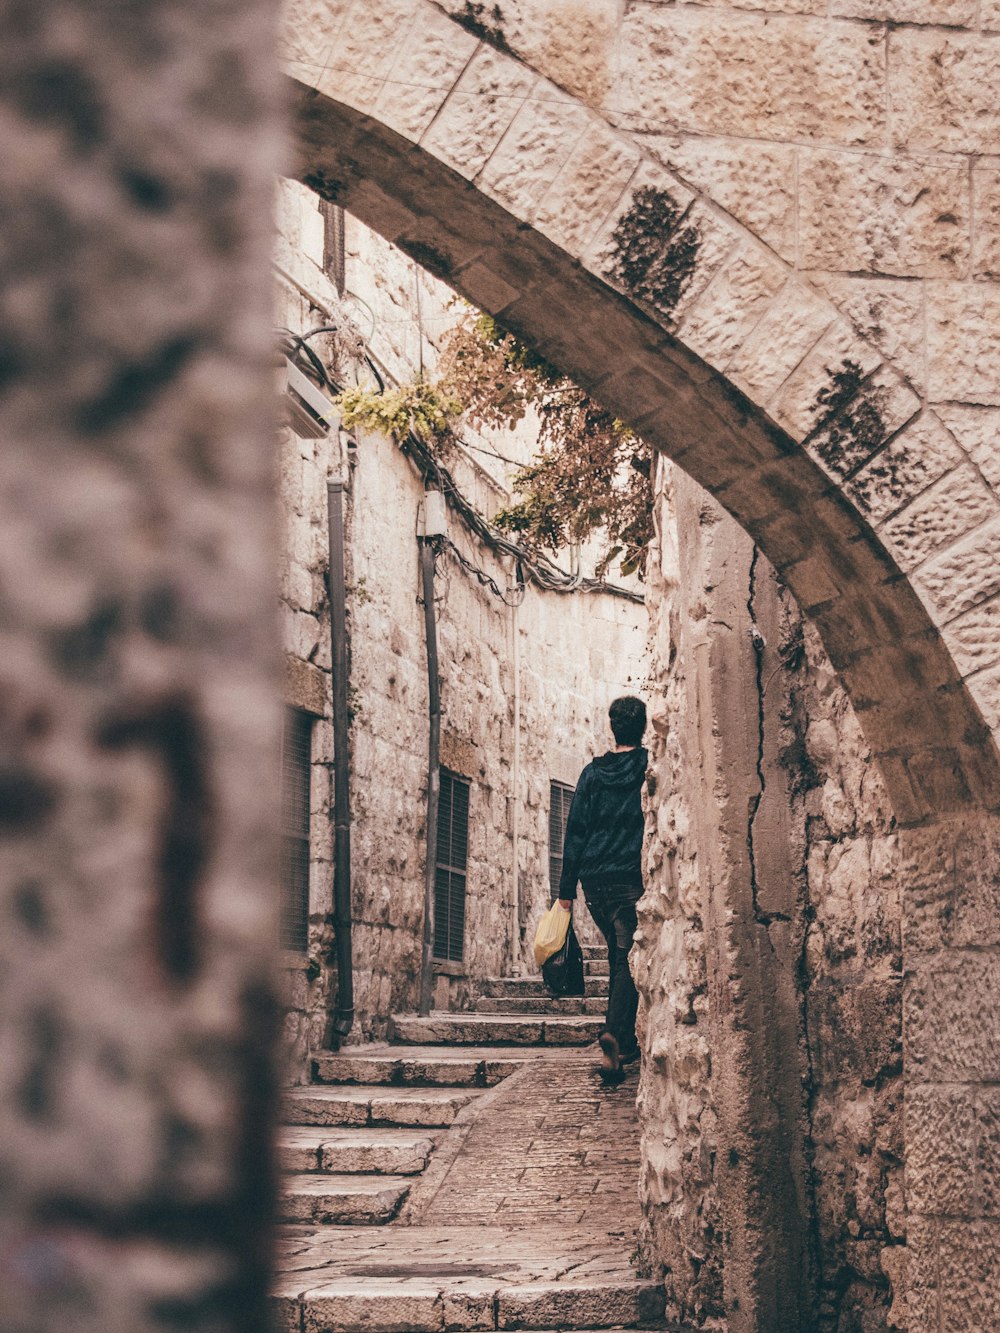 a man is walking down a narrow alley way